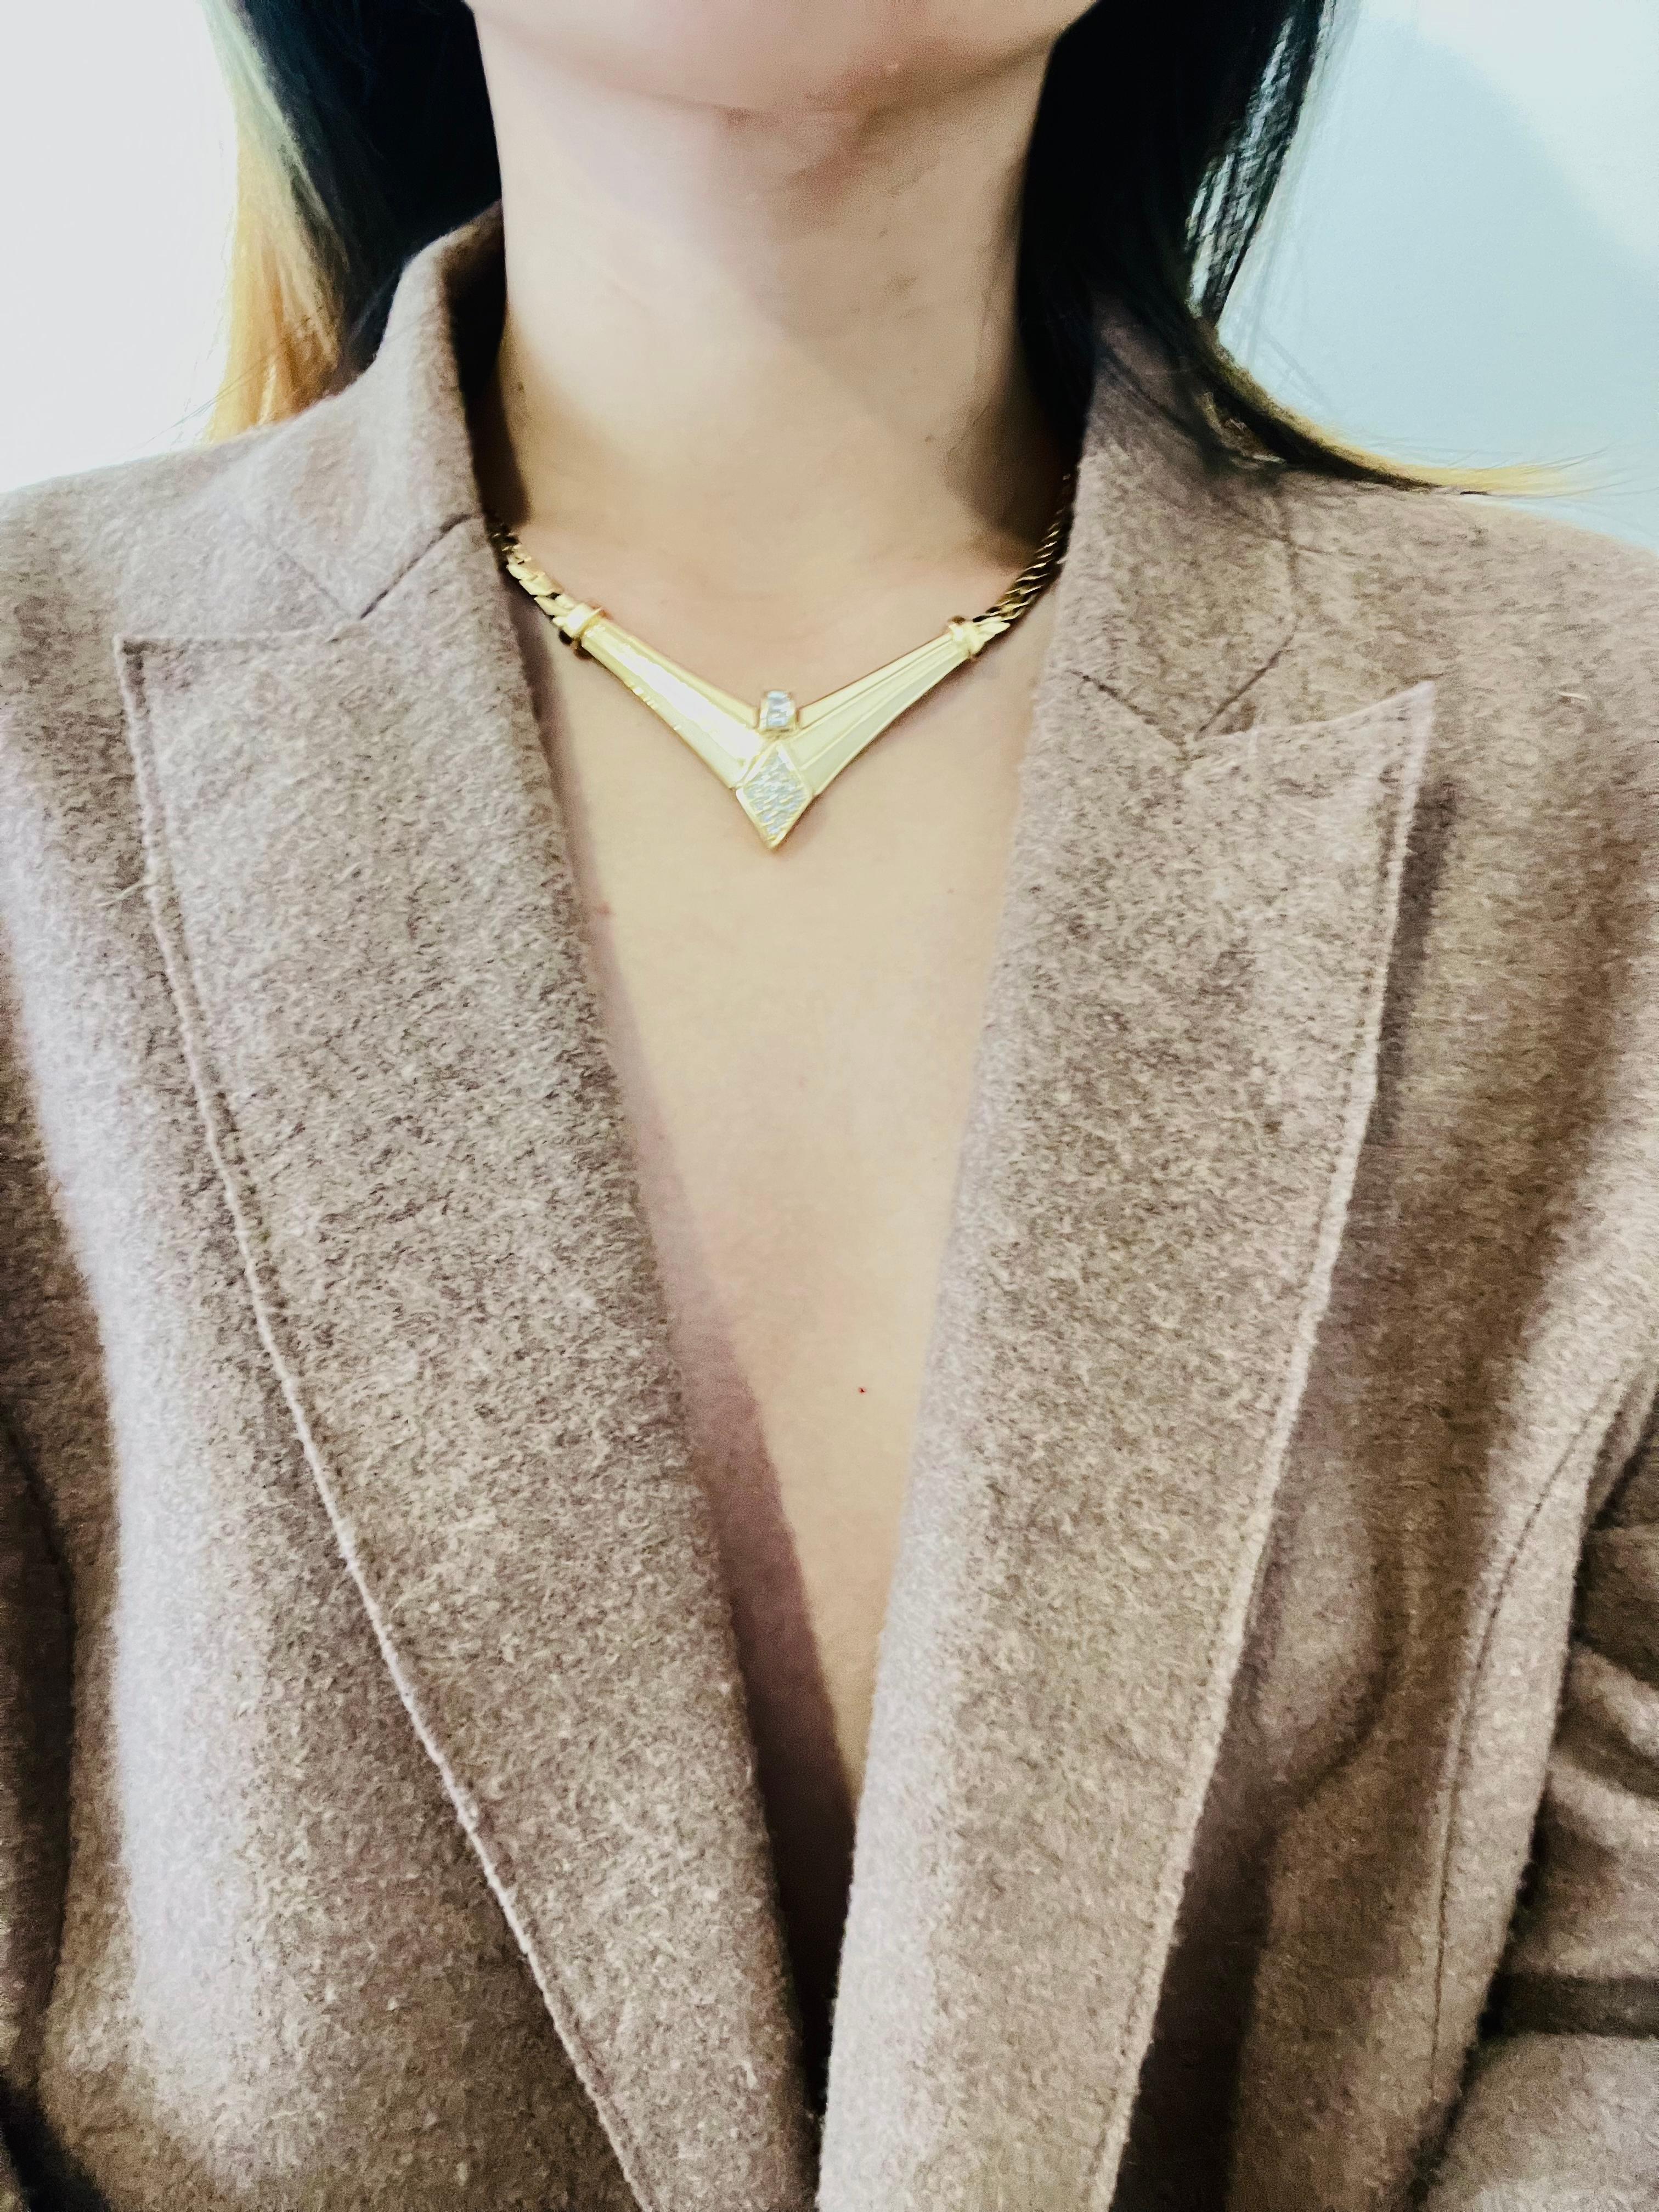 Christian Dior Vintage 1980s Beige Triangle Diamond Crystals Pendant Necklace In Good Condition For Sale In Wokingham, England